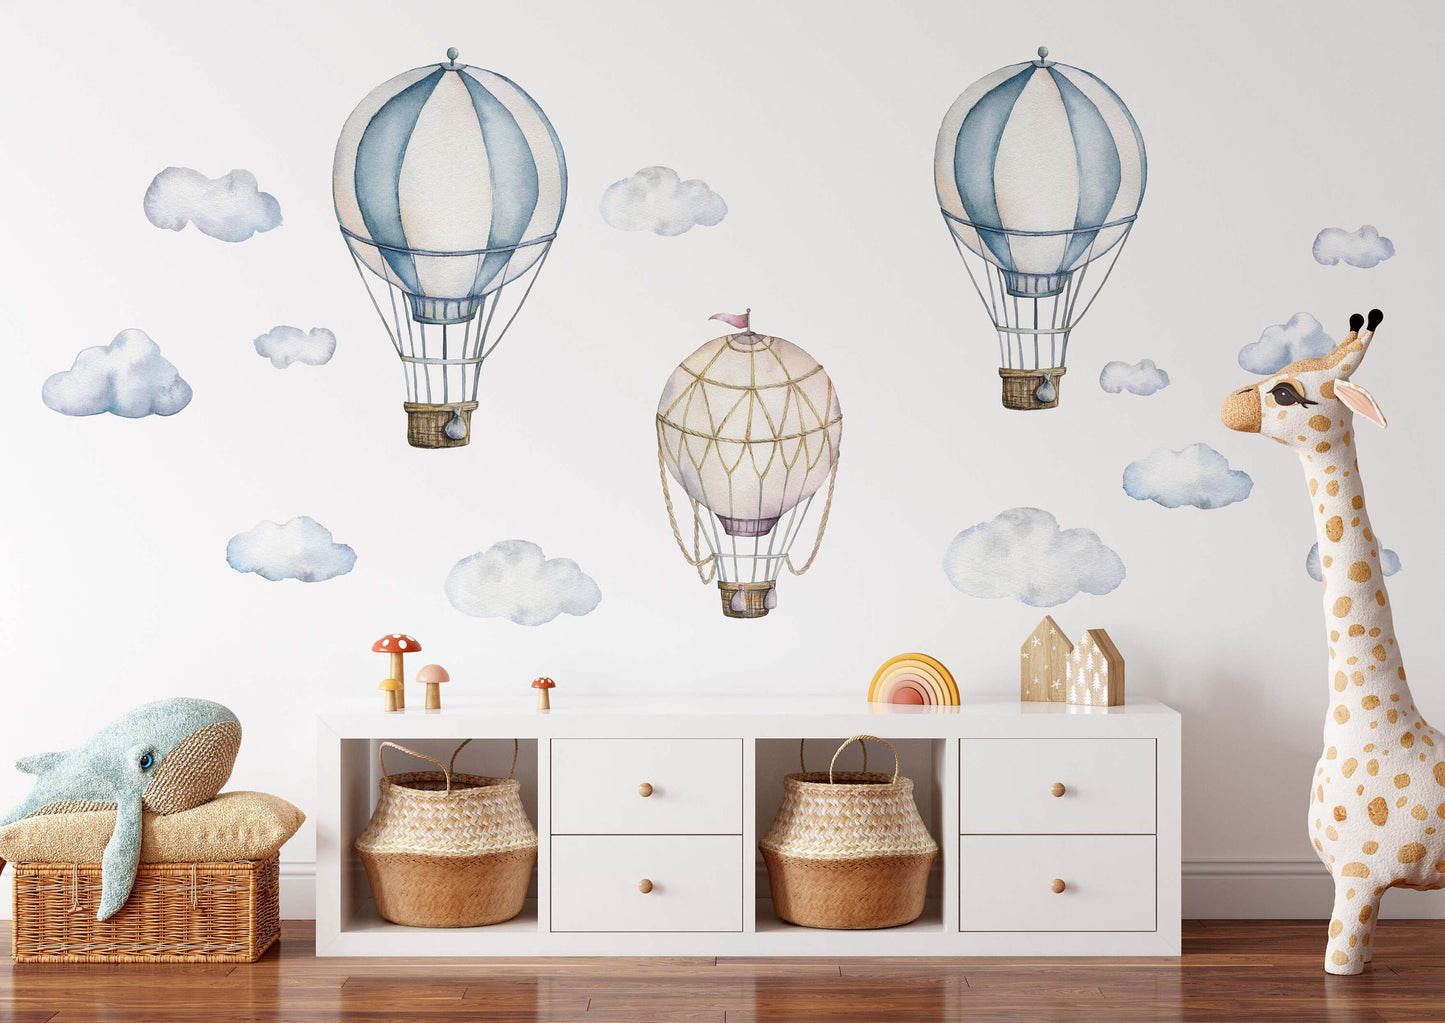 Retro Hot Air Balloons Wall Decals Vintage Color Clouds Stickers, LF089